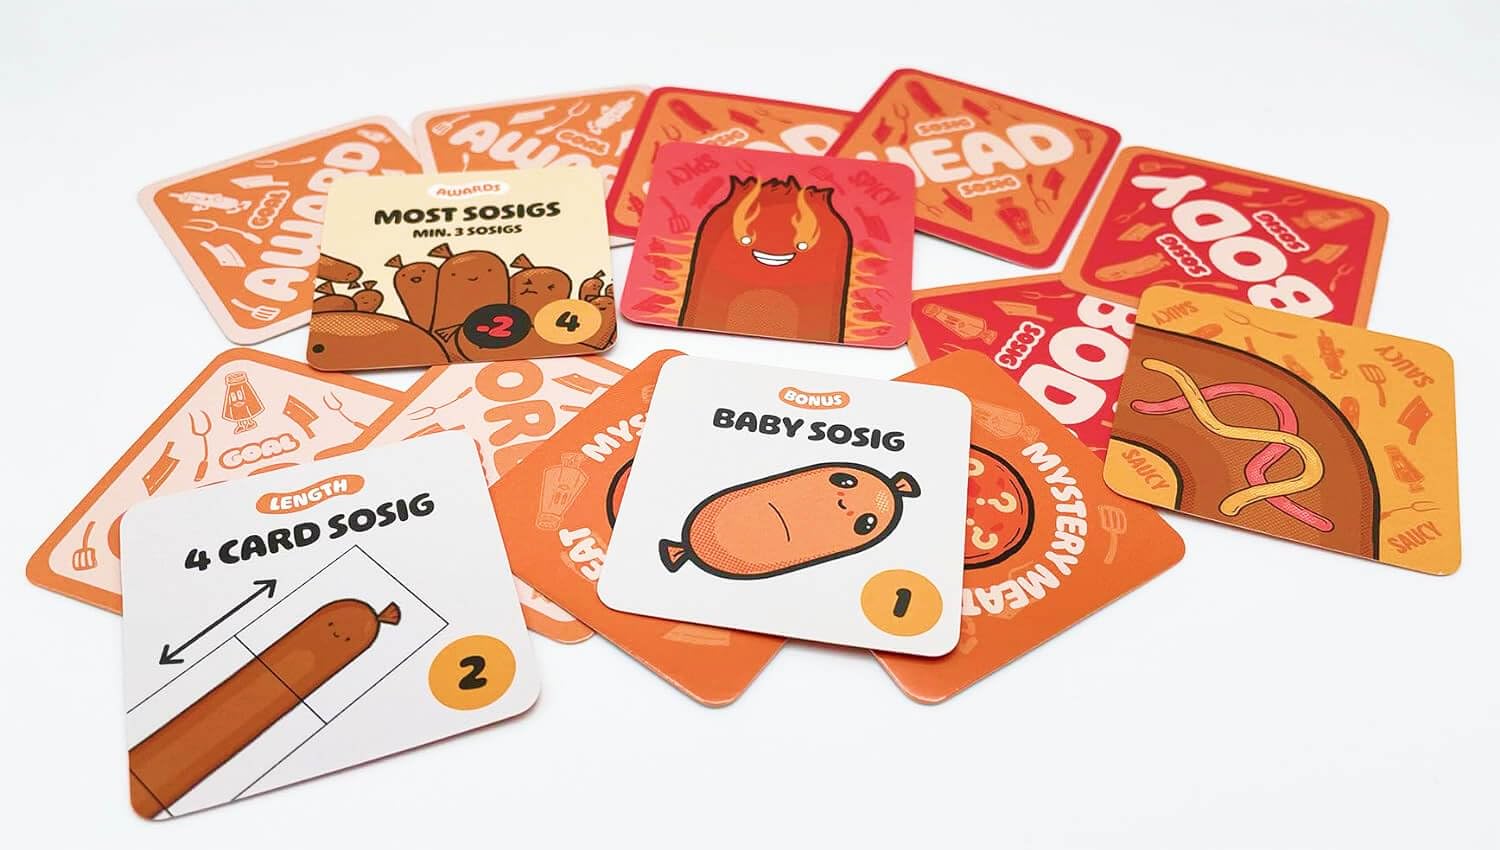 Joking Hazard Sosig Family Friendly Card Game for 2-4 Players, Game for Kids and Adults, Travel Sized